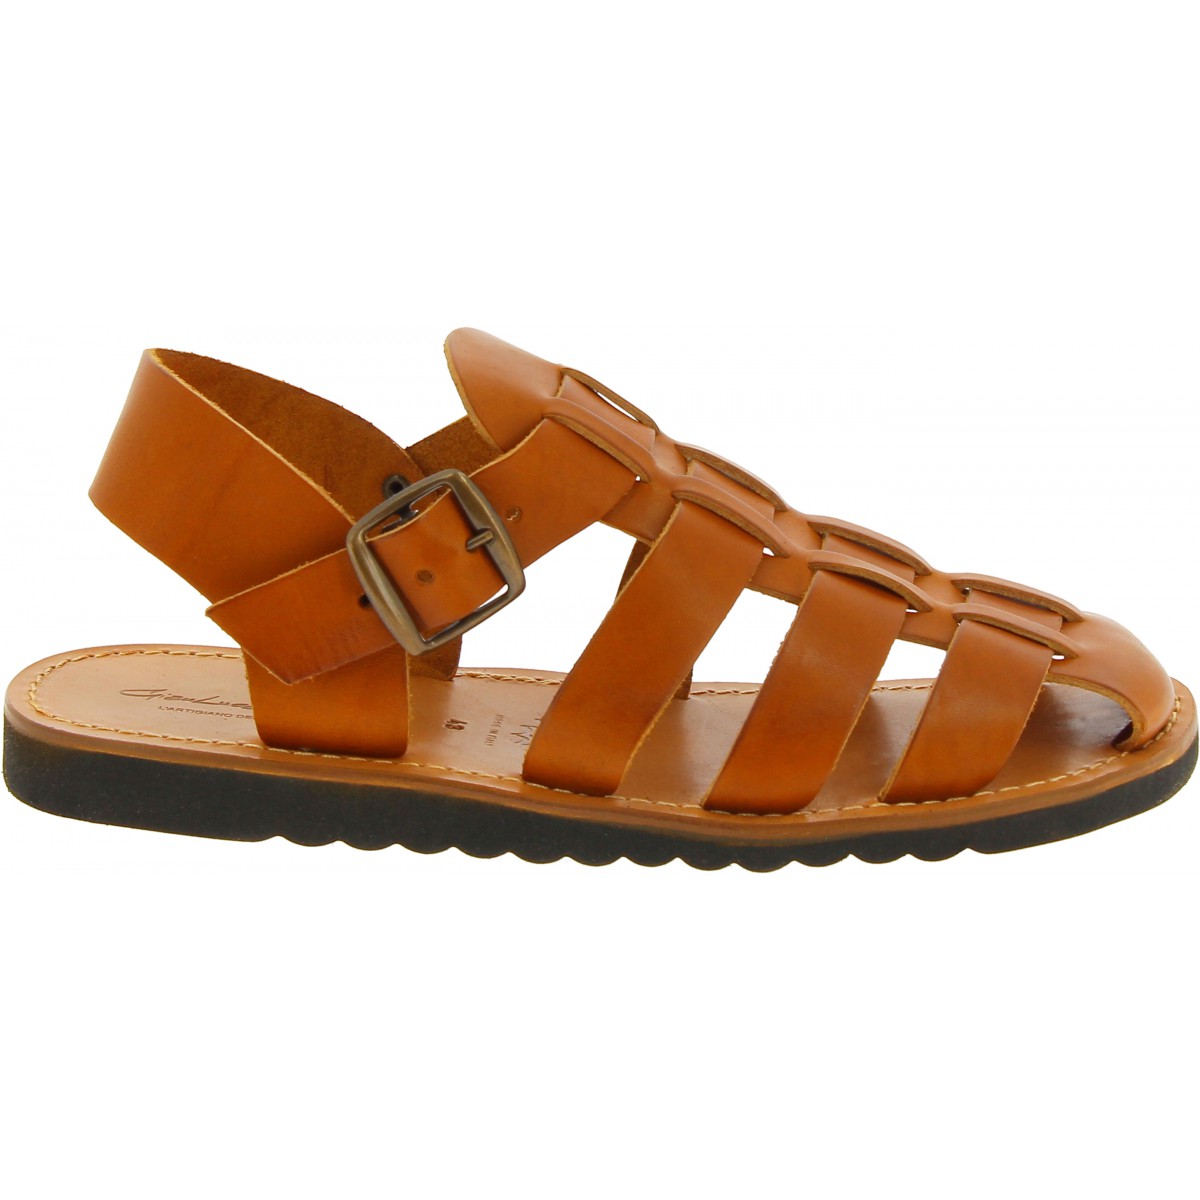 Handmade in Italy men's fisherman sandals in tan leather | The leather ...